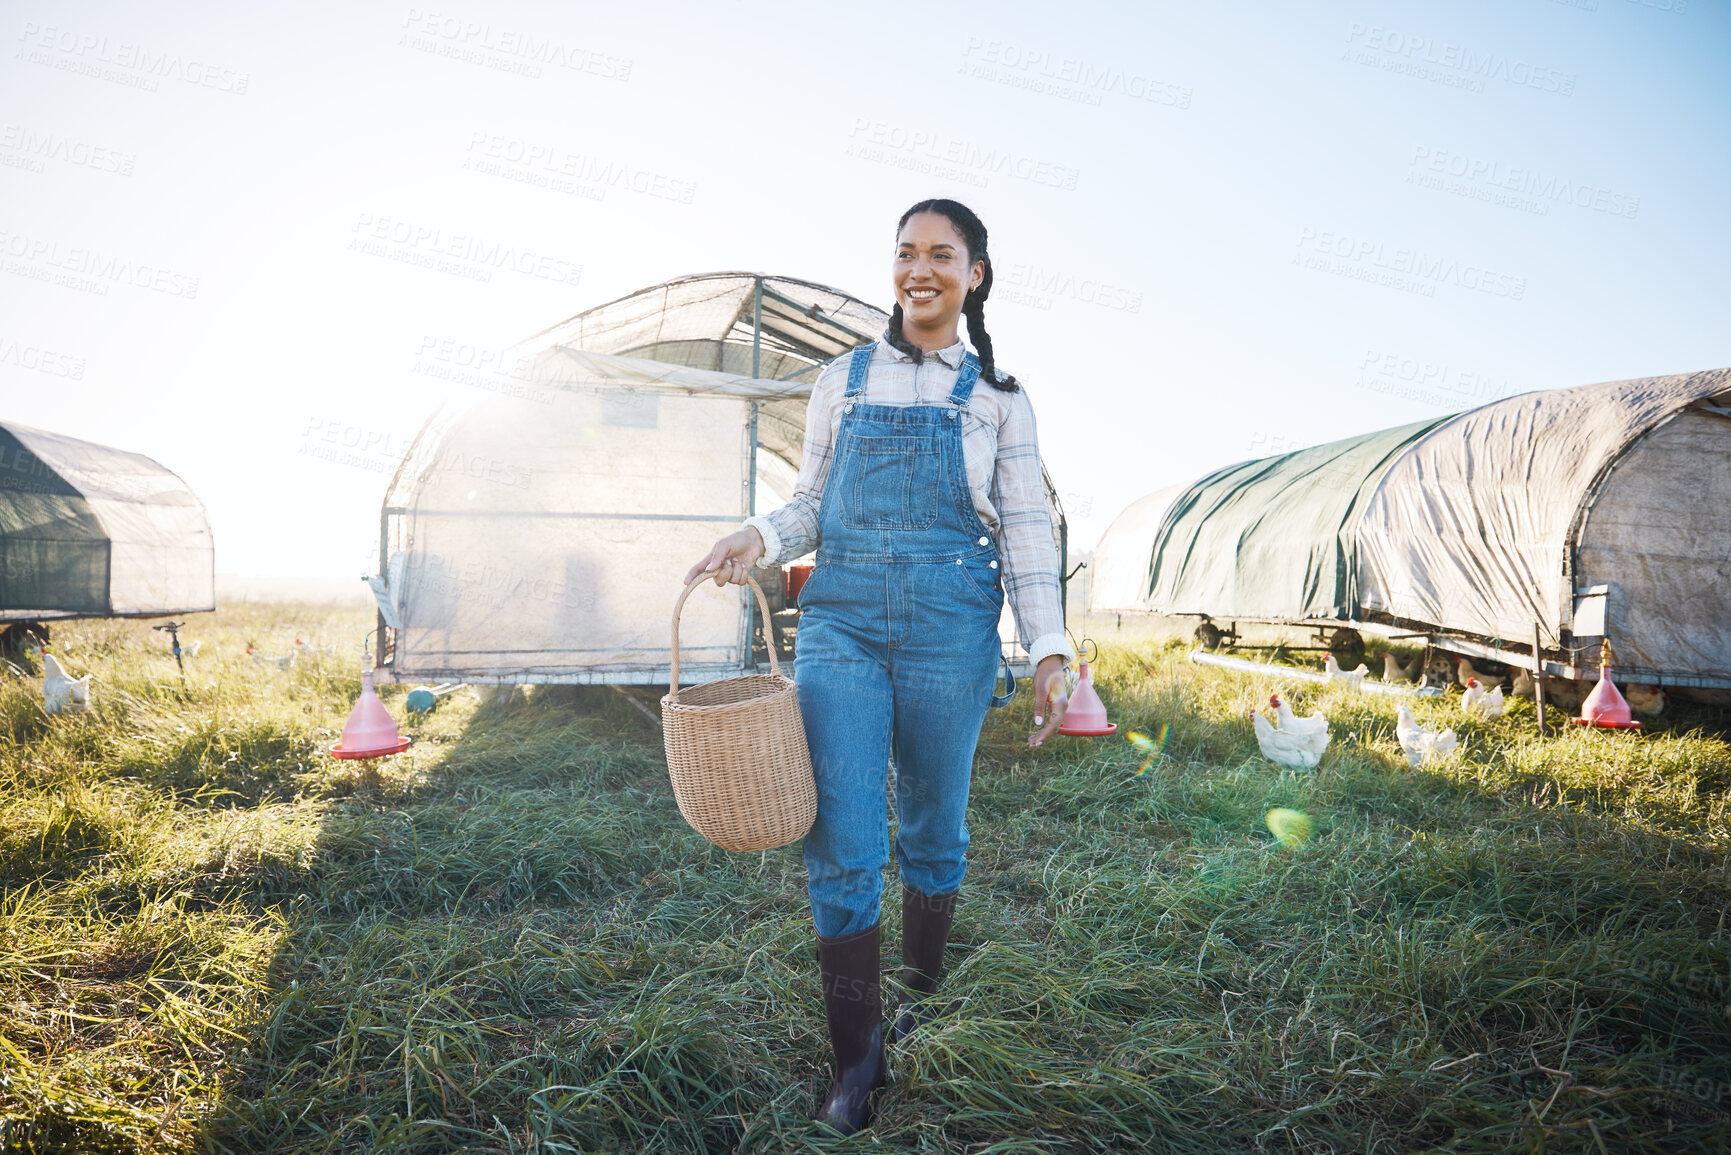 Buy stock photo Chicken coop, woman with basket walking on farm with birds, grass and countryside field with sustainable business. Agriculture, poultry farming and happy farmer working with food, nature and animals.